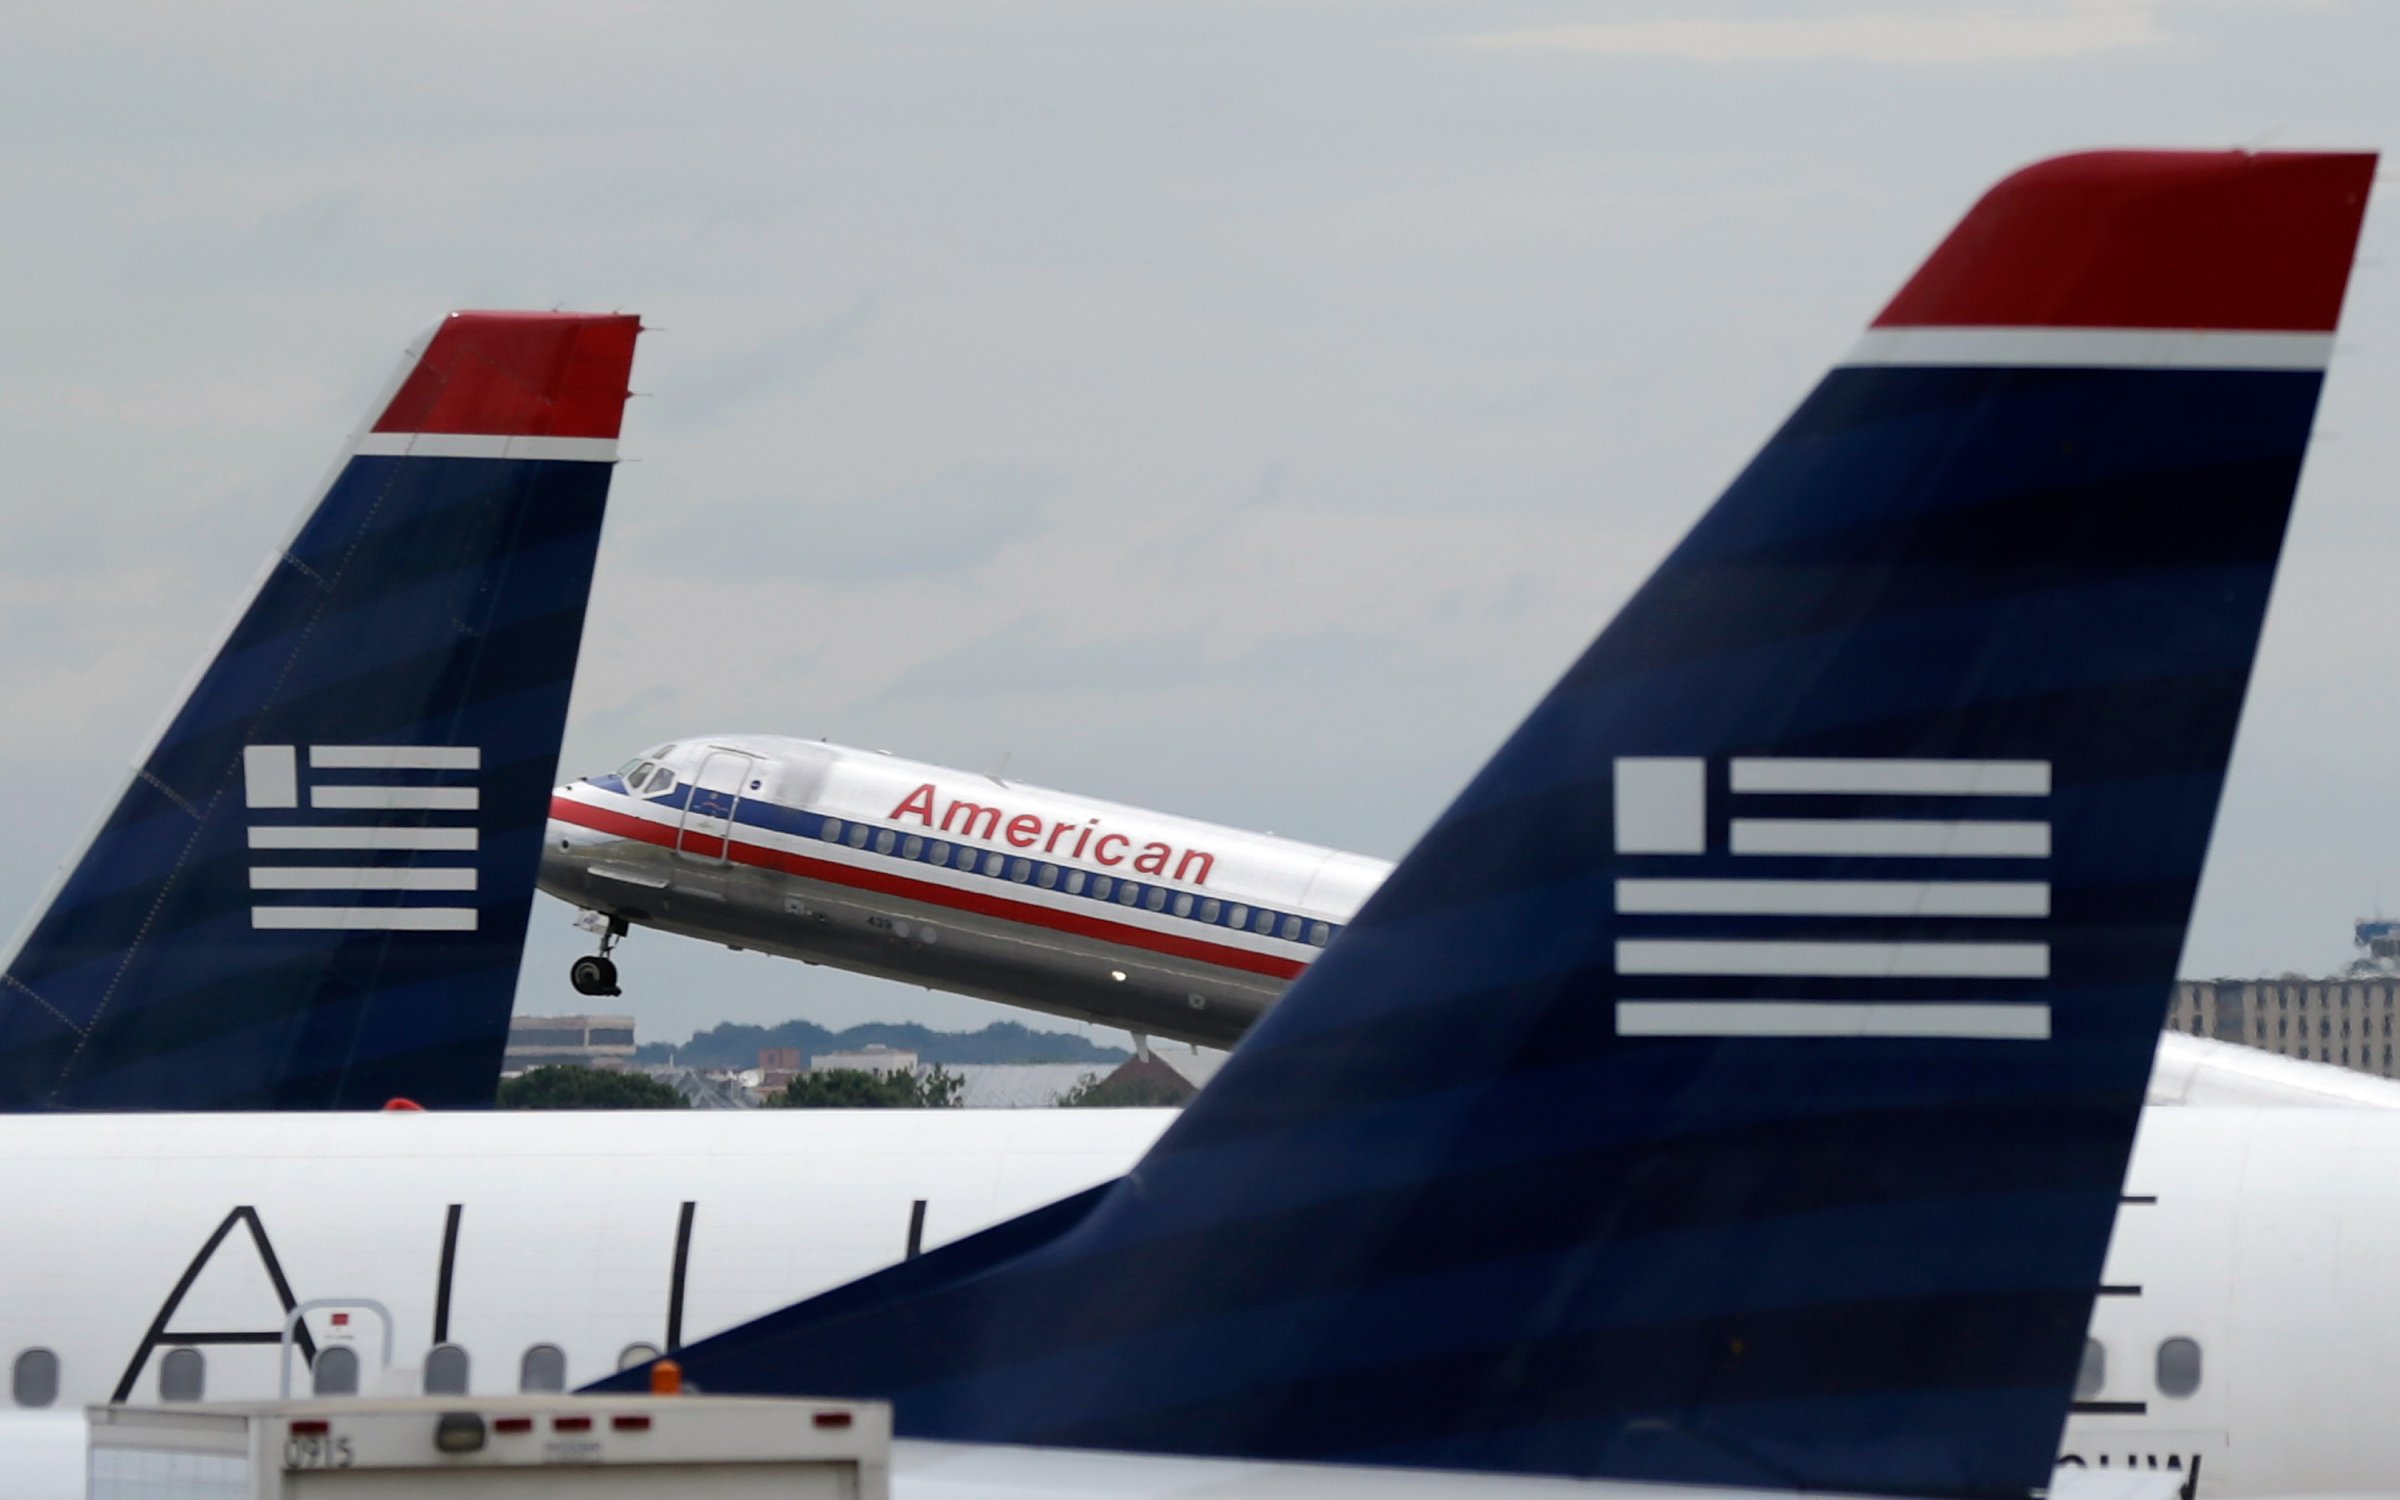 Justice Department Files Suit To Block Proposed Merger Of American and US Airways